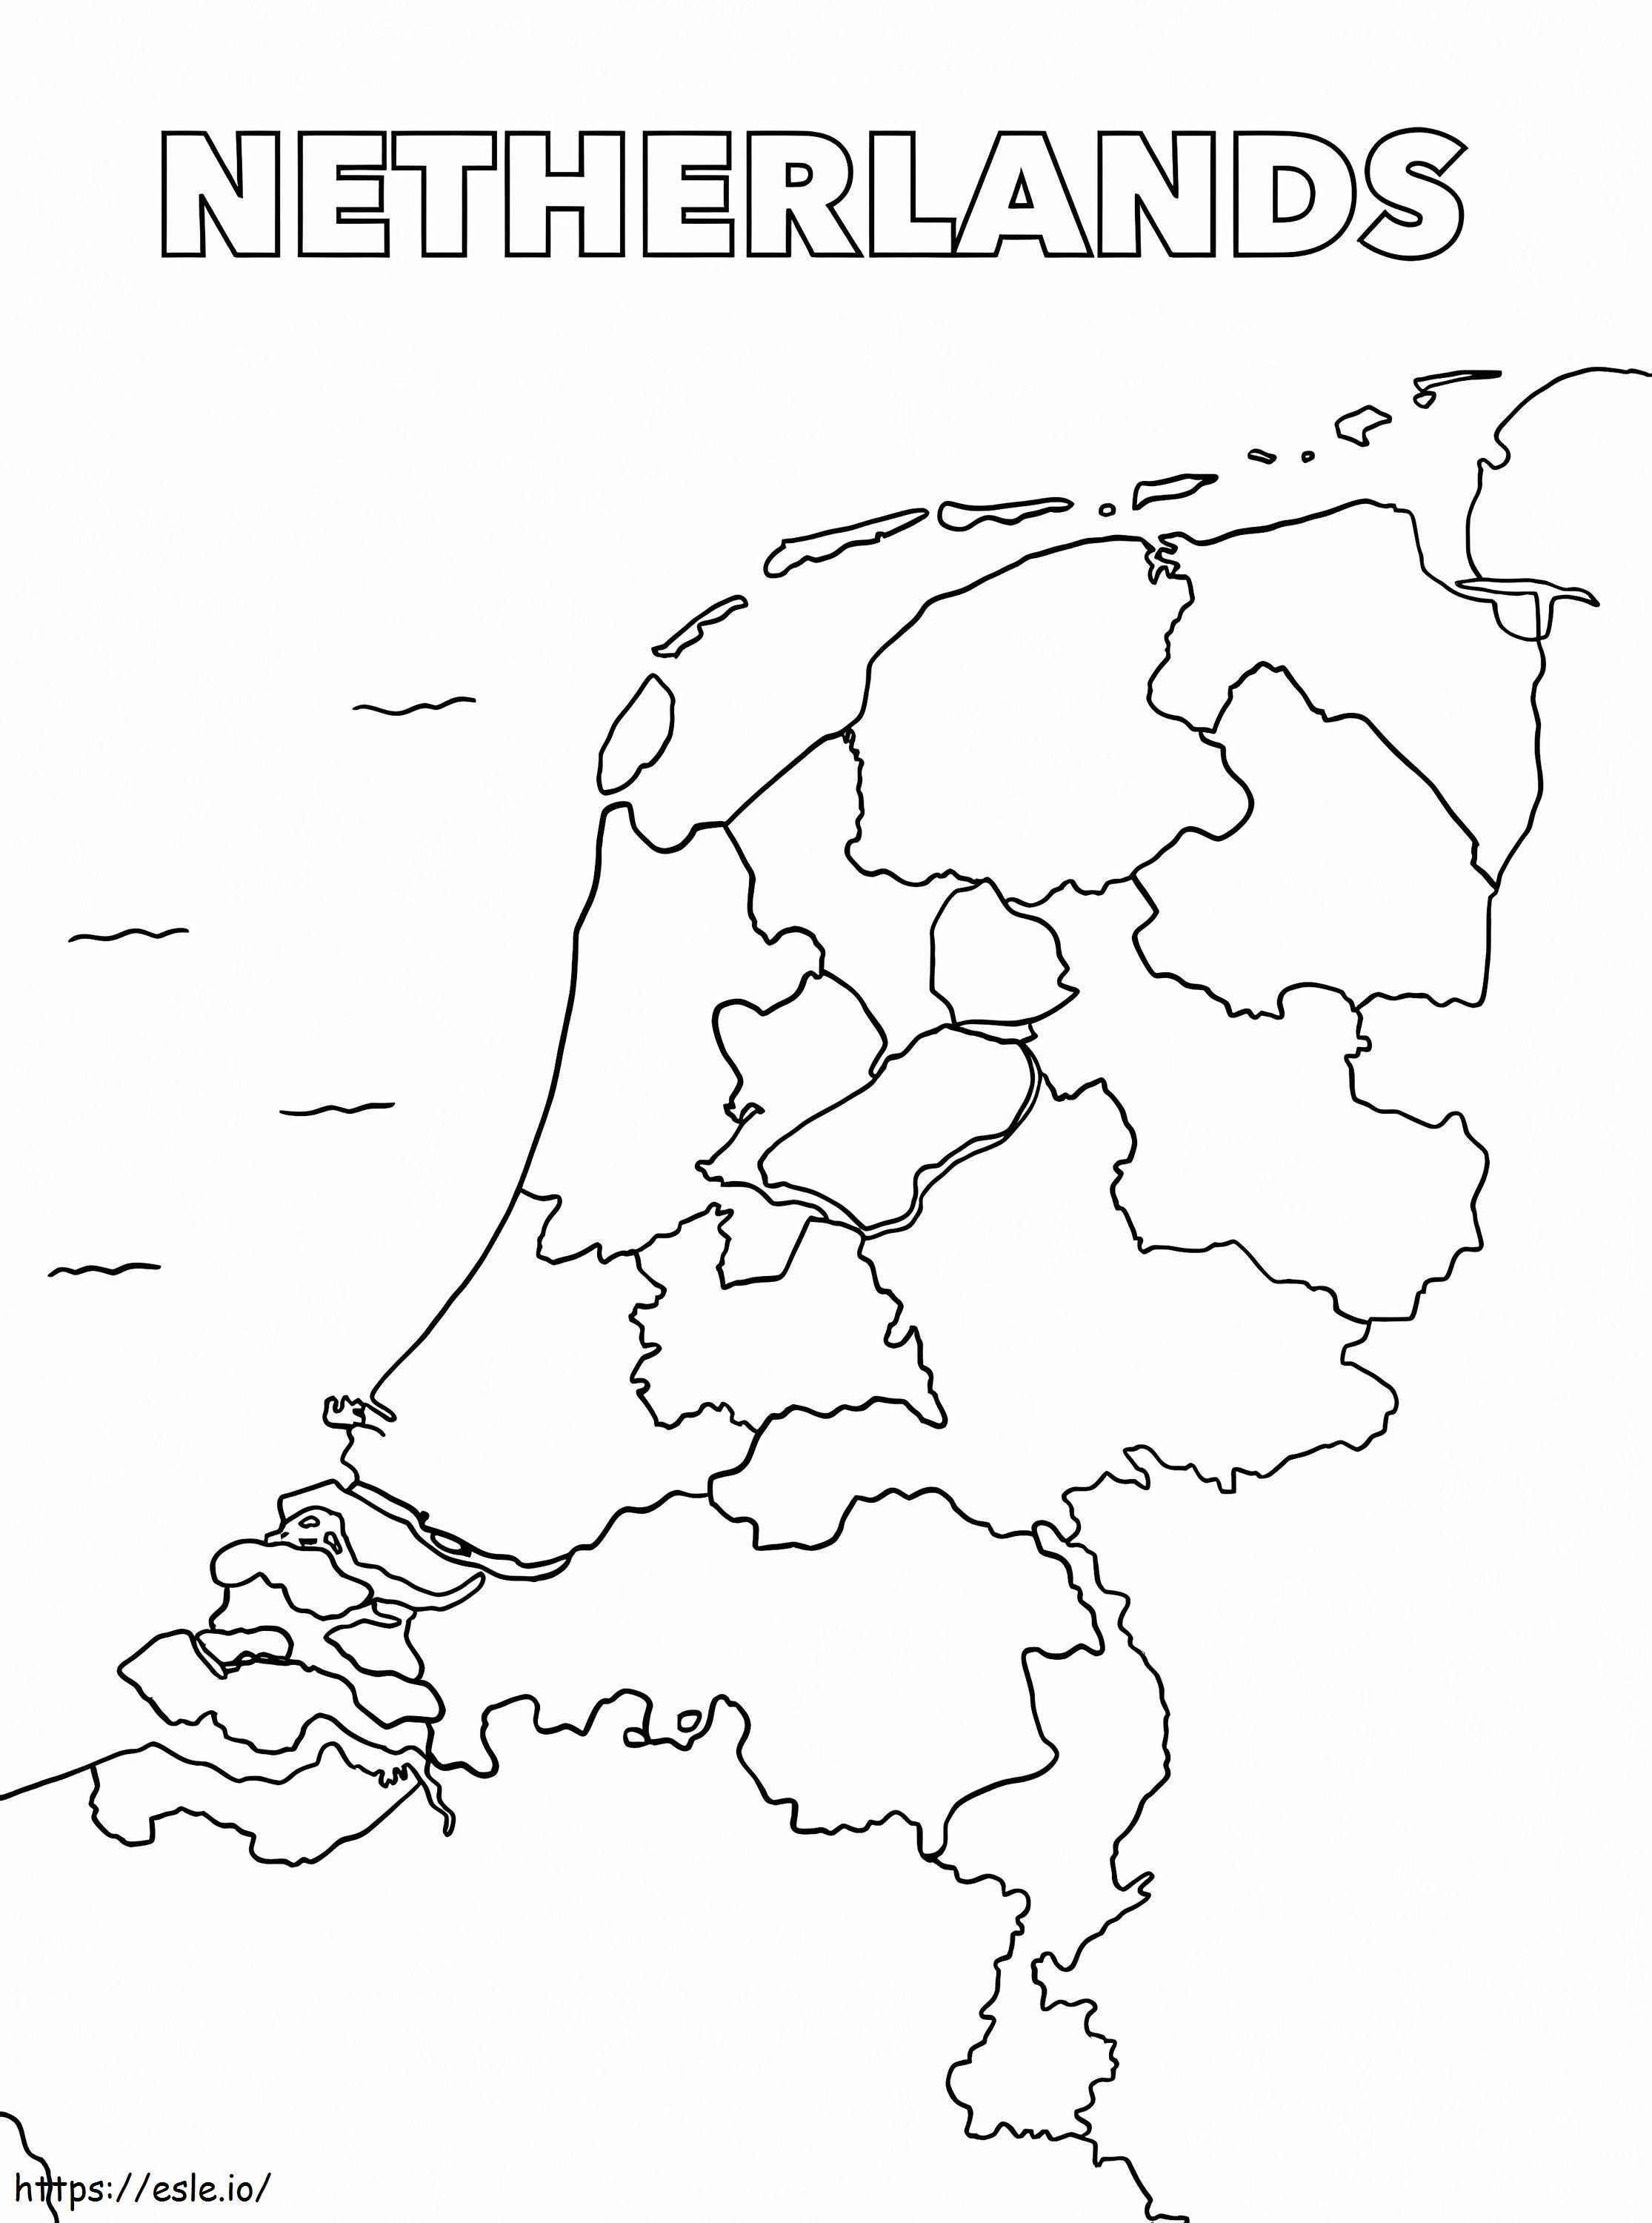 The Netherlands Map 2 coloring page